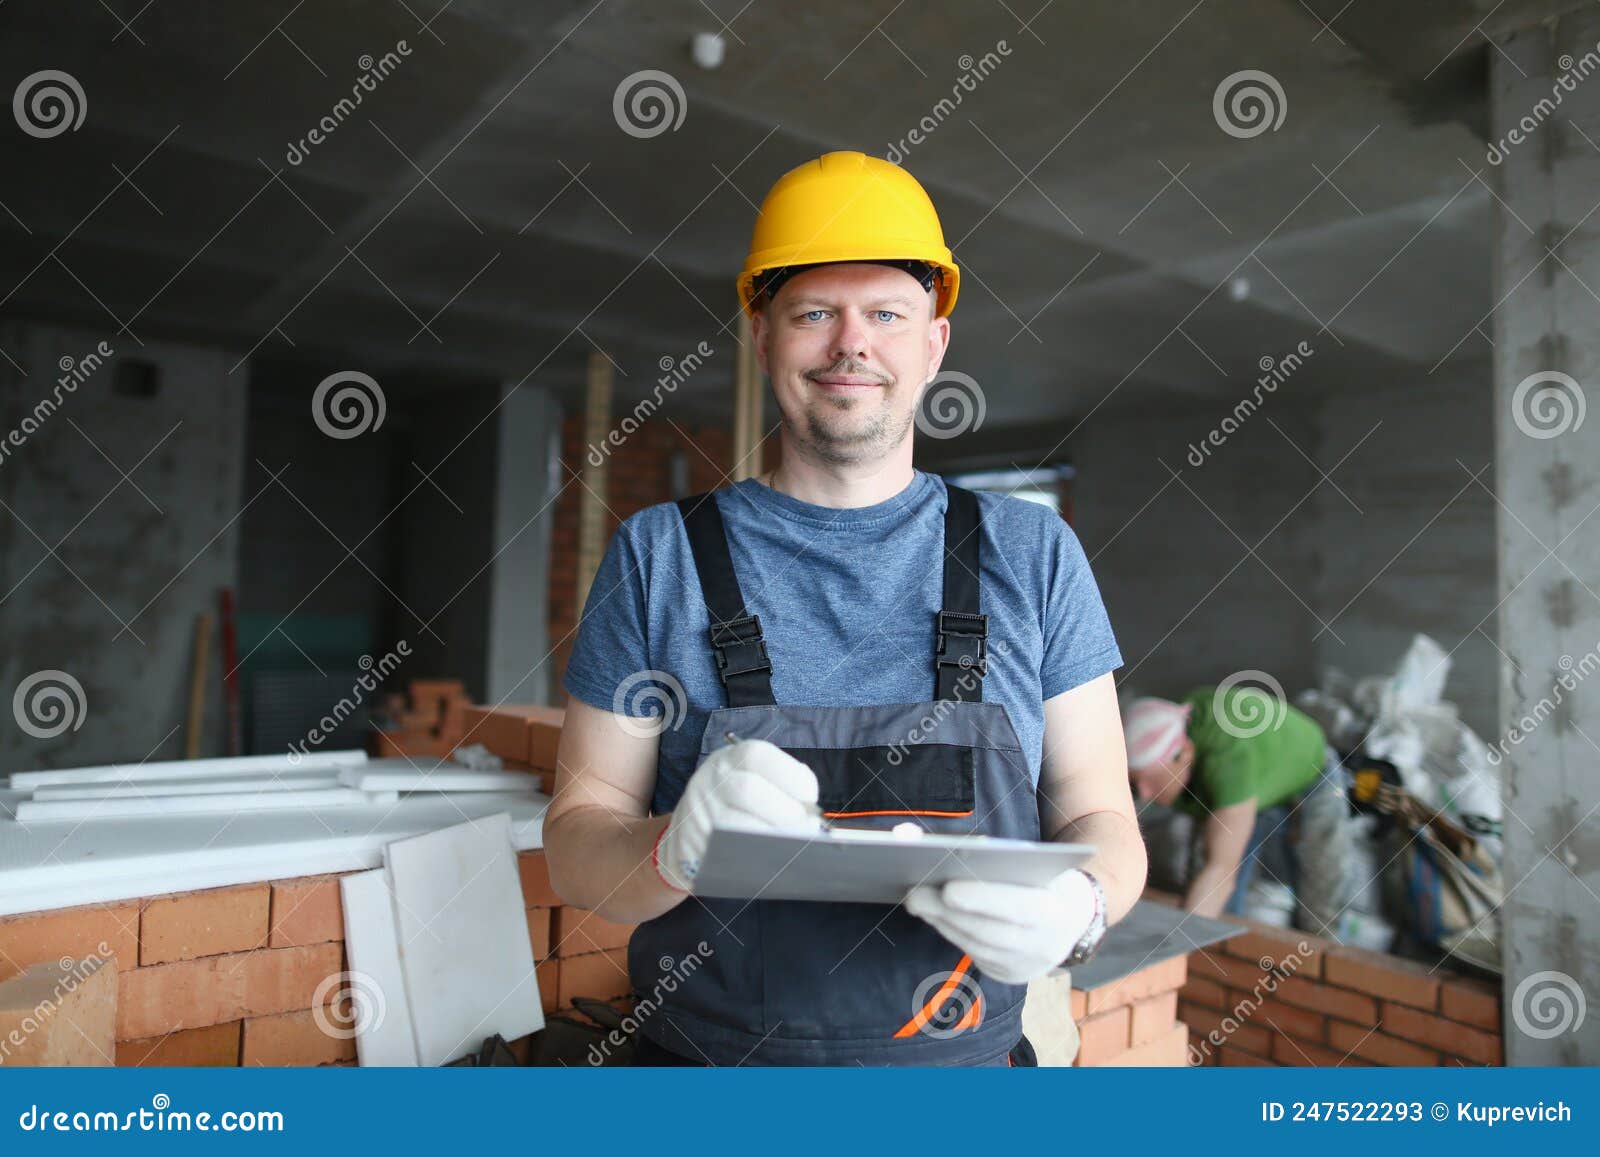 worker hold clipboard and write down consumable materials for renovation